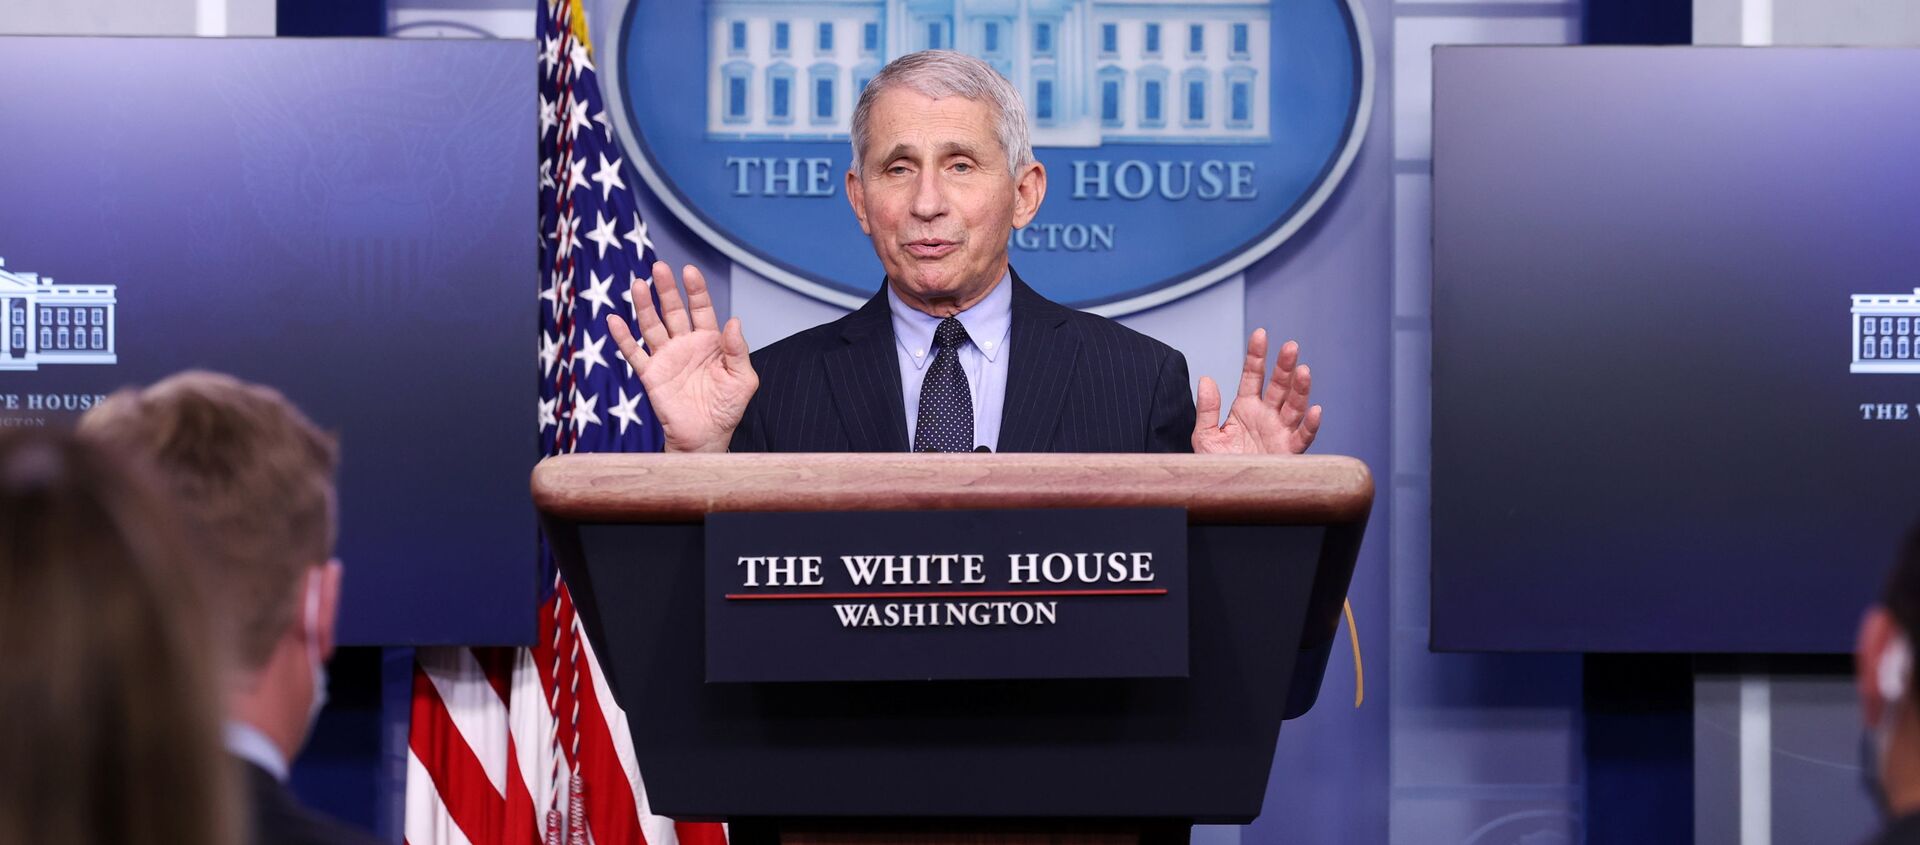 NIH National Institute of Allergy and Infectious Diseases Director Anthony Fauci addresses the daily press briefing at the White House in Washington, U.S. January 21, 2021. - Sputnik International, 1920, 24.01.2021